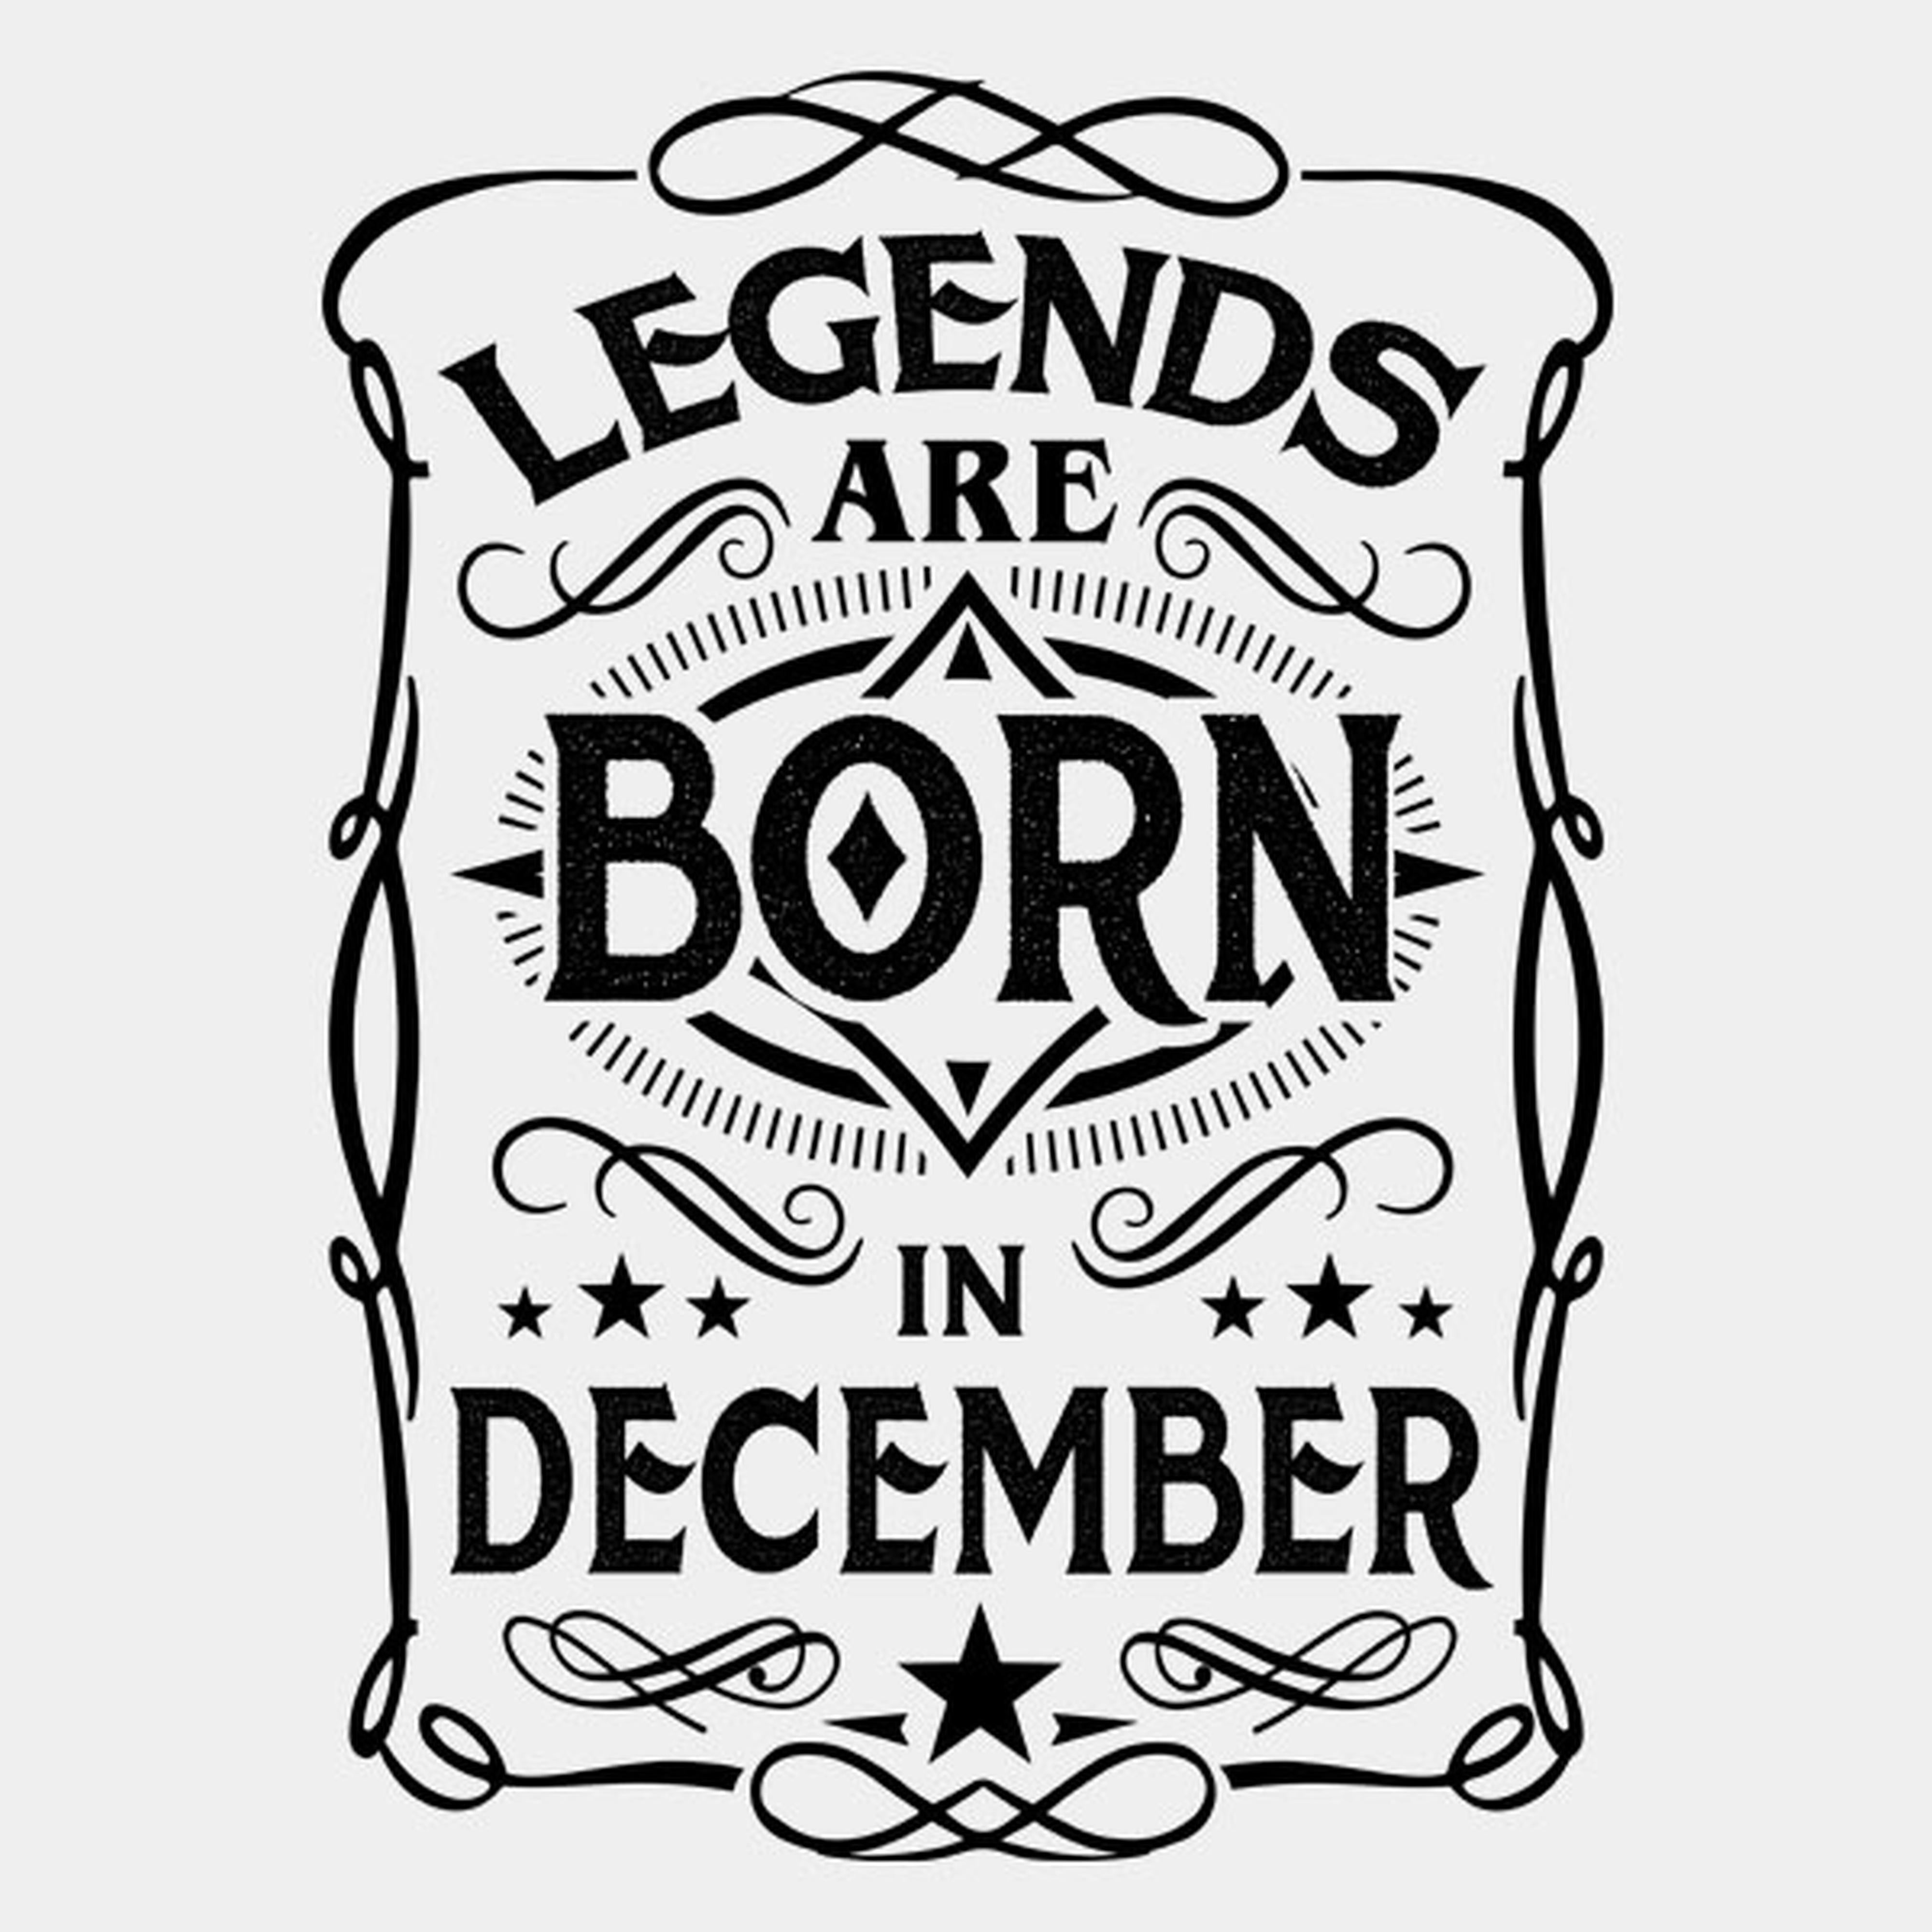 Legends are born in December - T-shirt